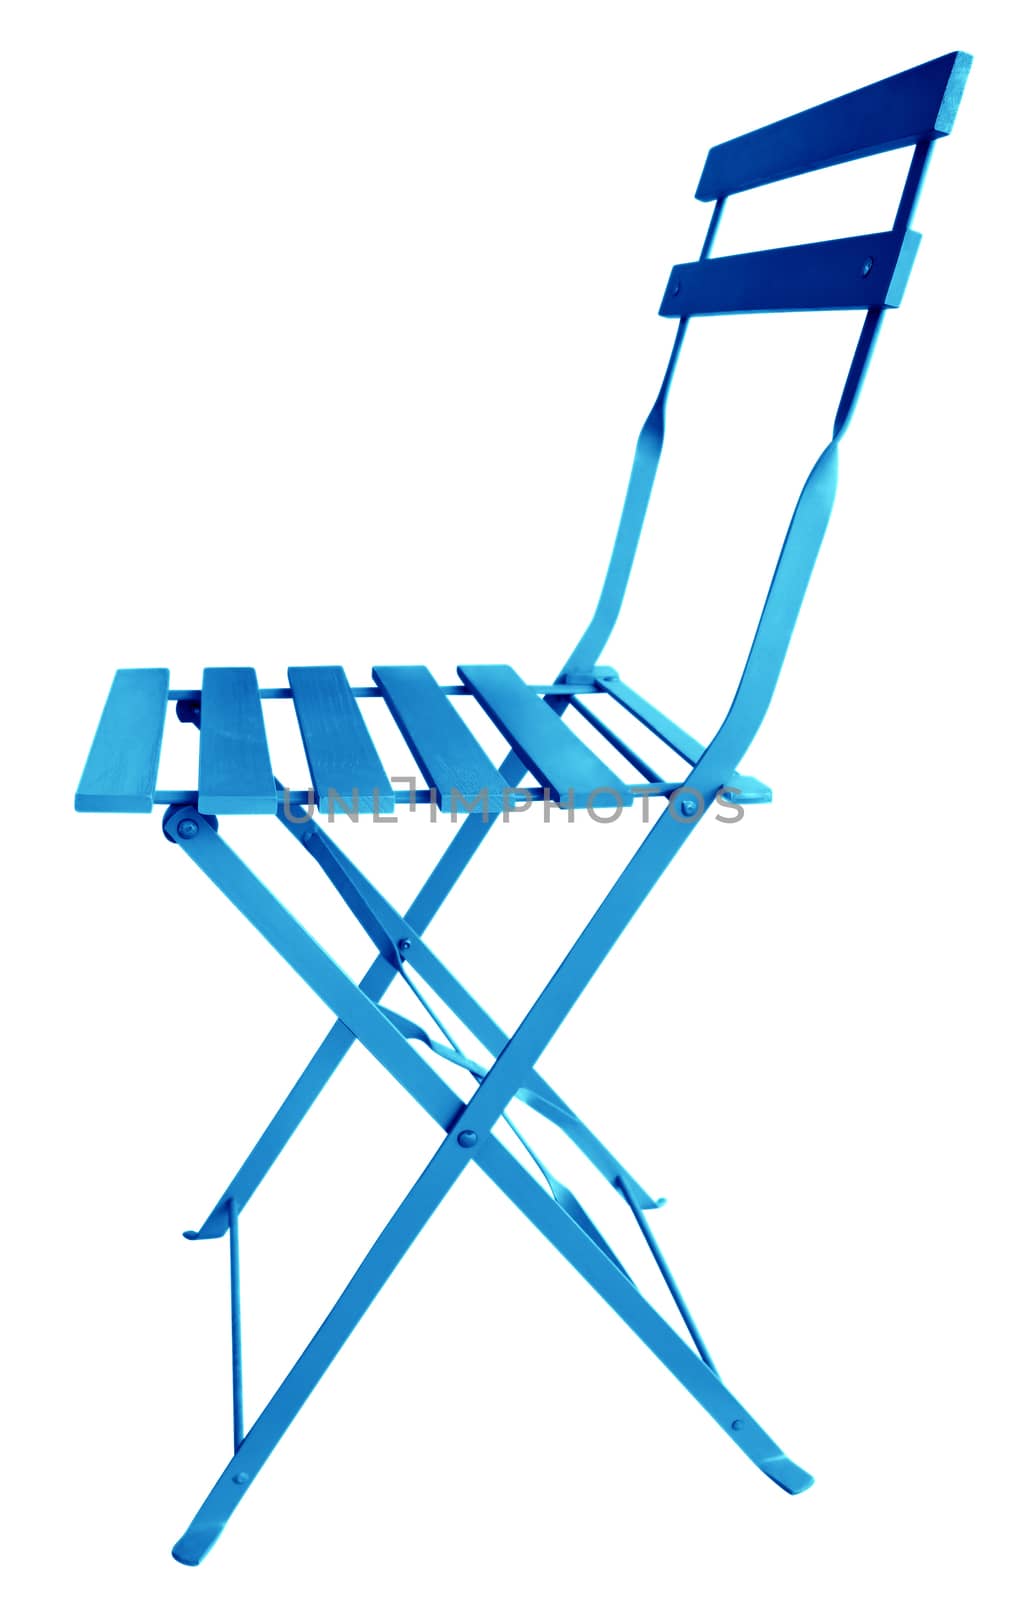 Blue Folding Chair isolated on white, with clipping path.